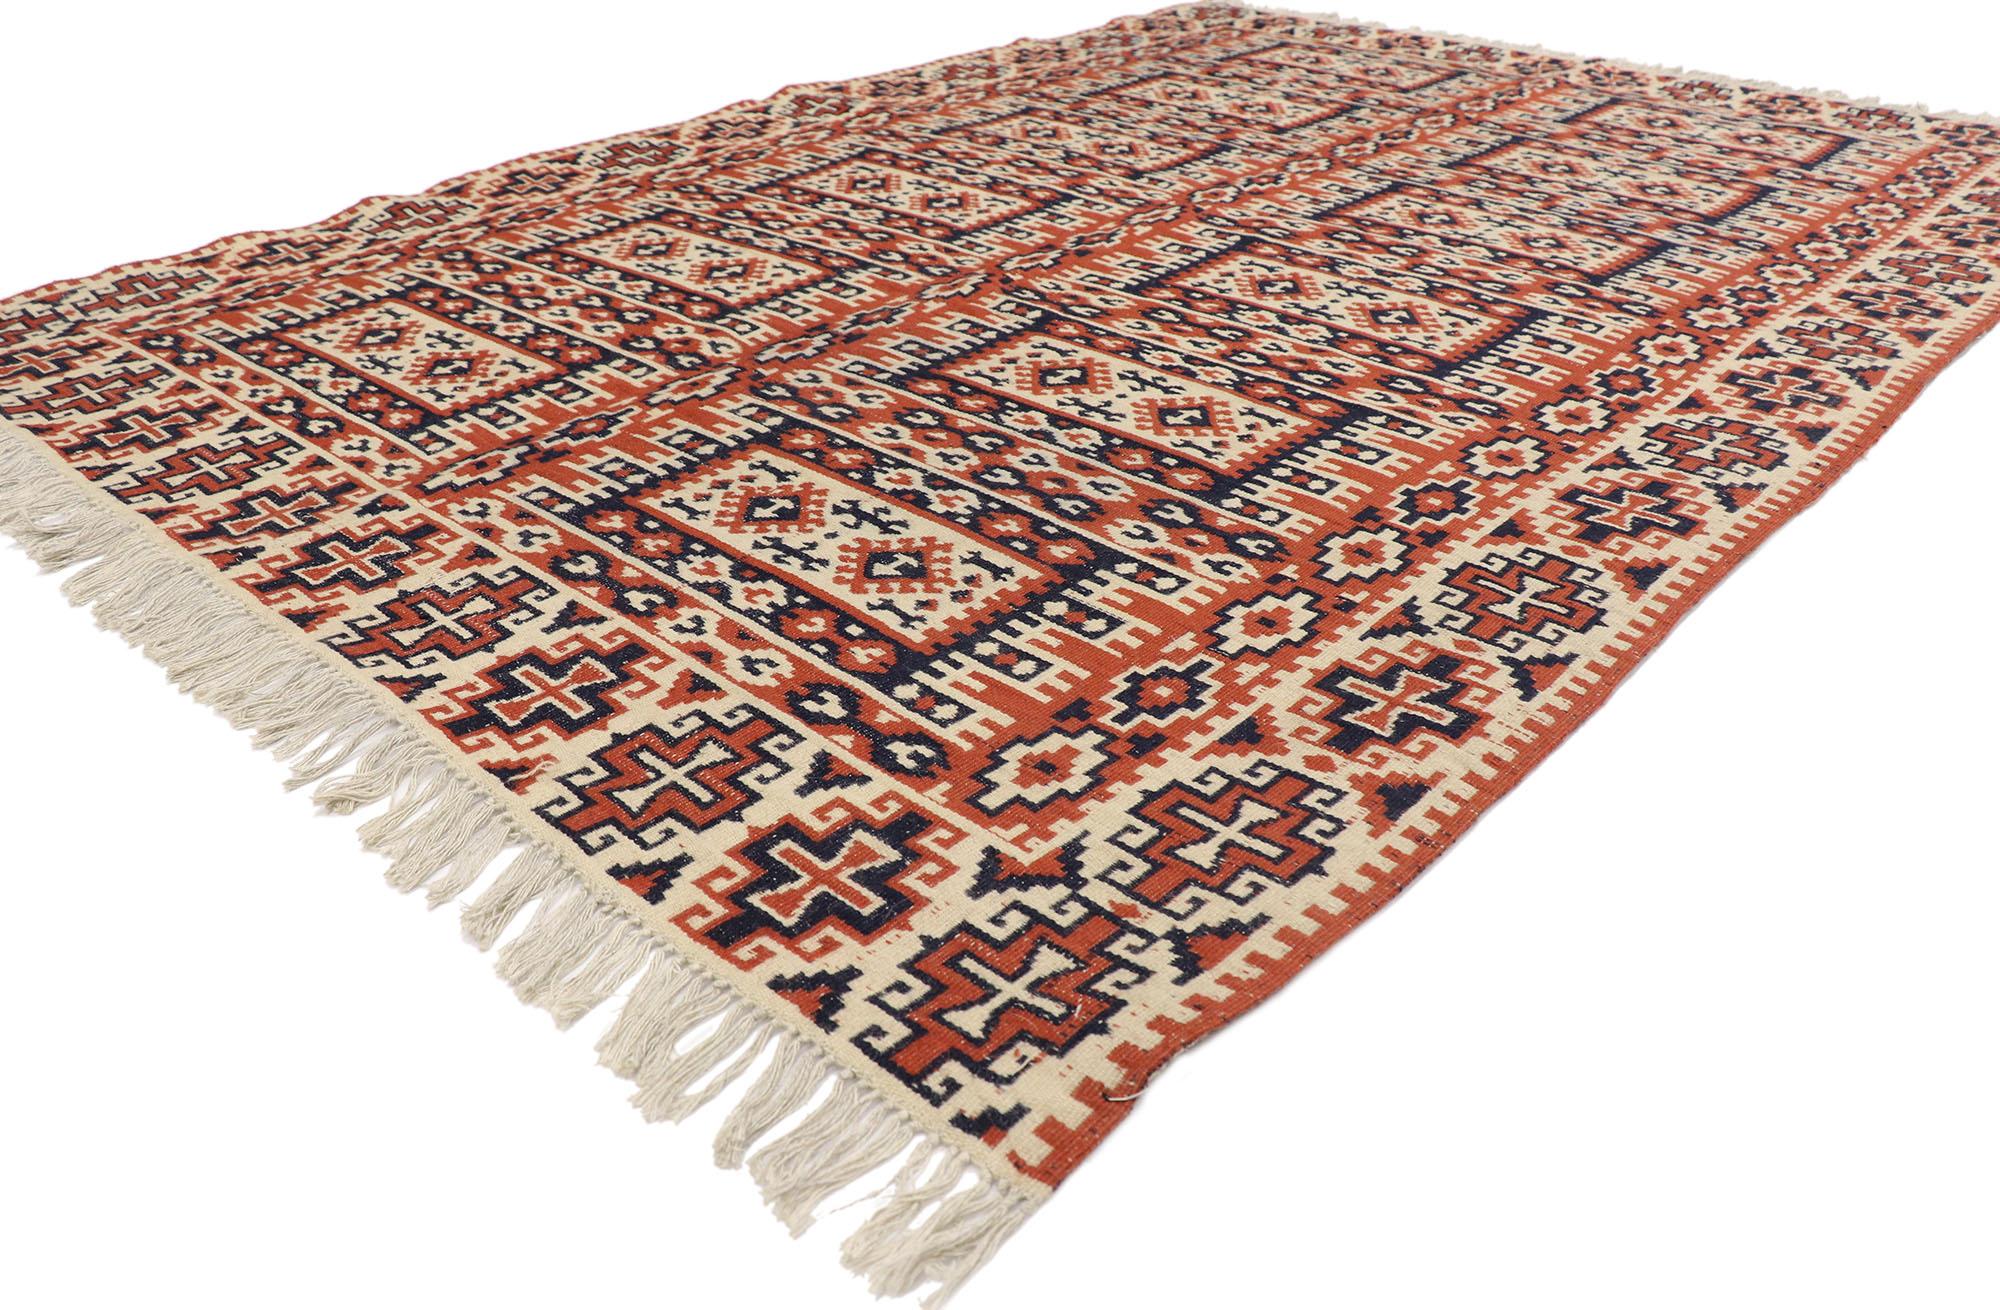 77939 Vintage Persian Kilim Rug with Tribal Style, 04'07 x 09'00.
 